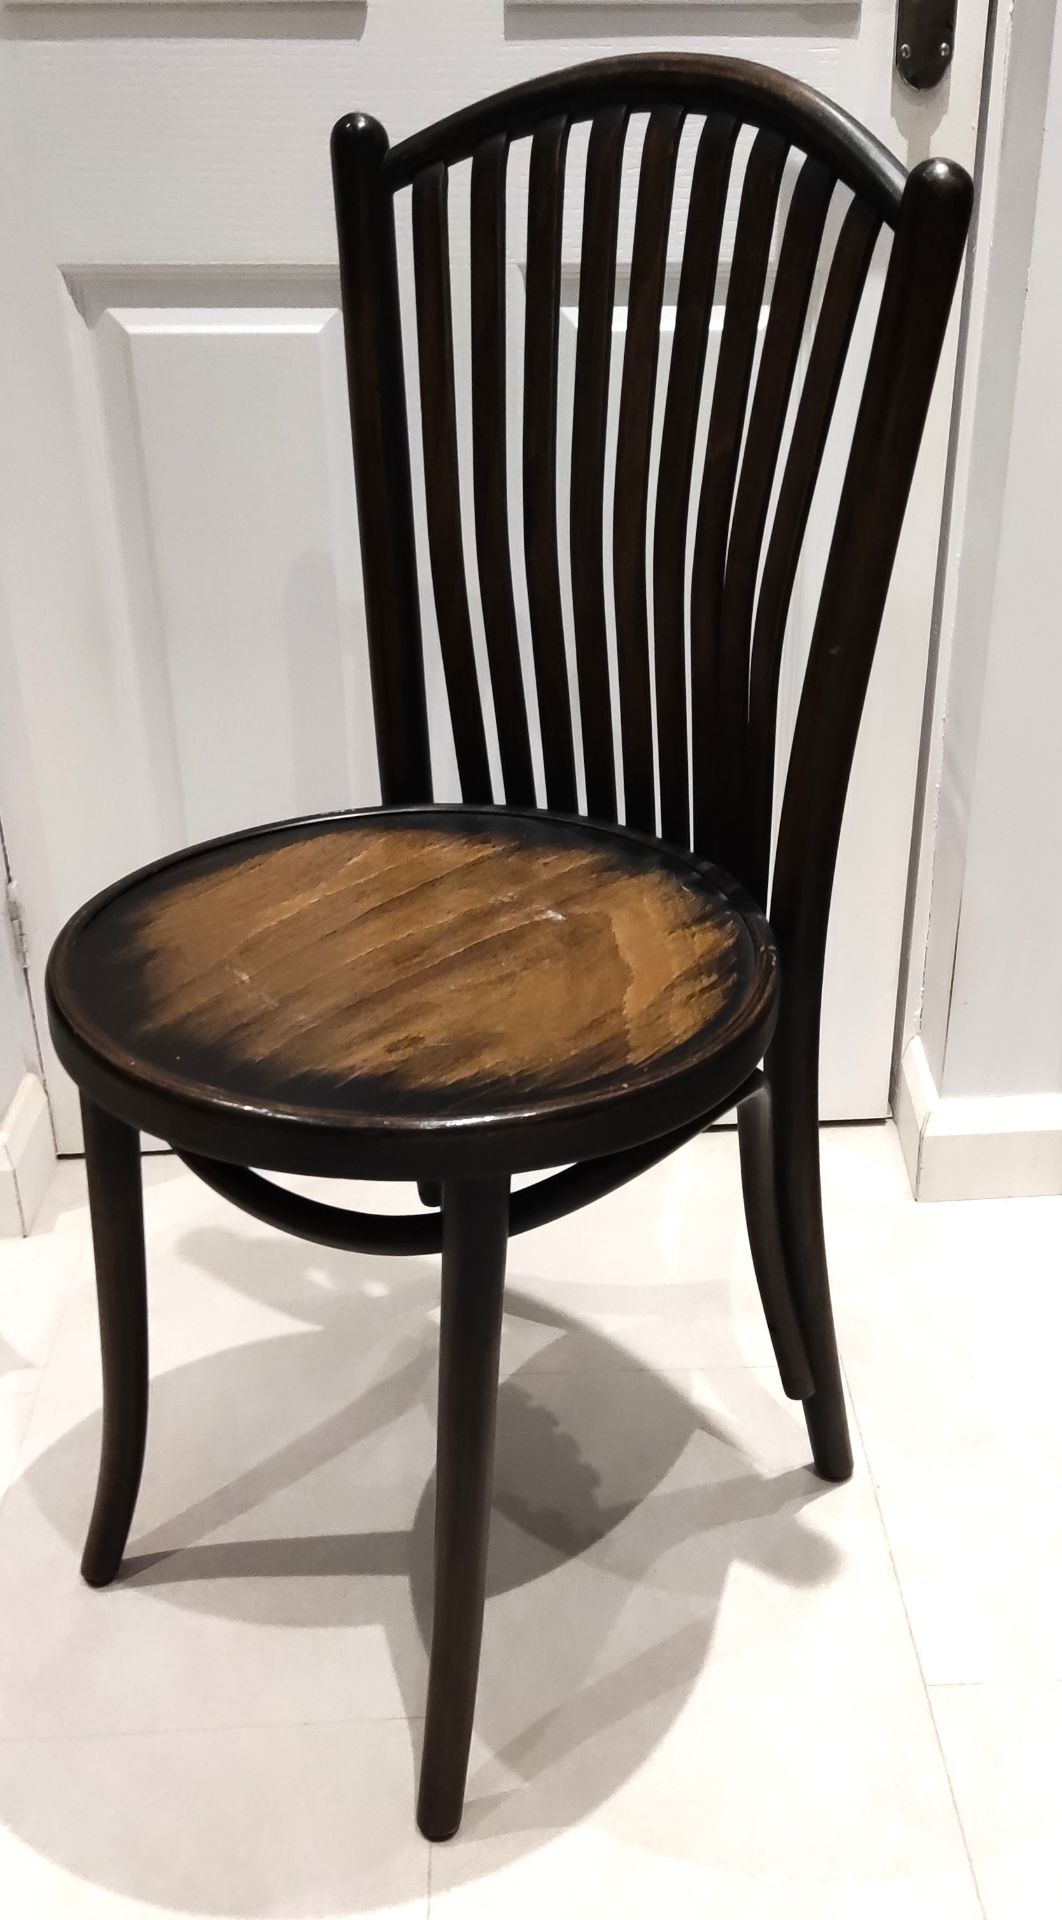 1 x Vintage Dark Wood Bentwood Chair - CL444 - NO VAT ON THE HAMMER - Location: Altrincham WA14 This - Image 15 of 15